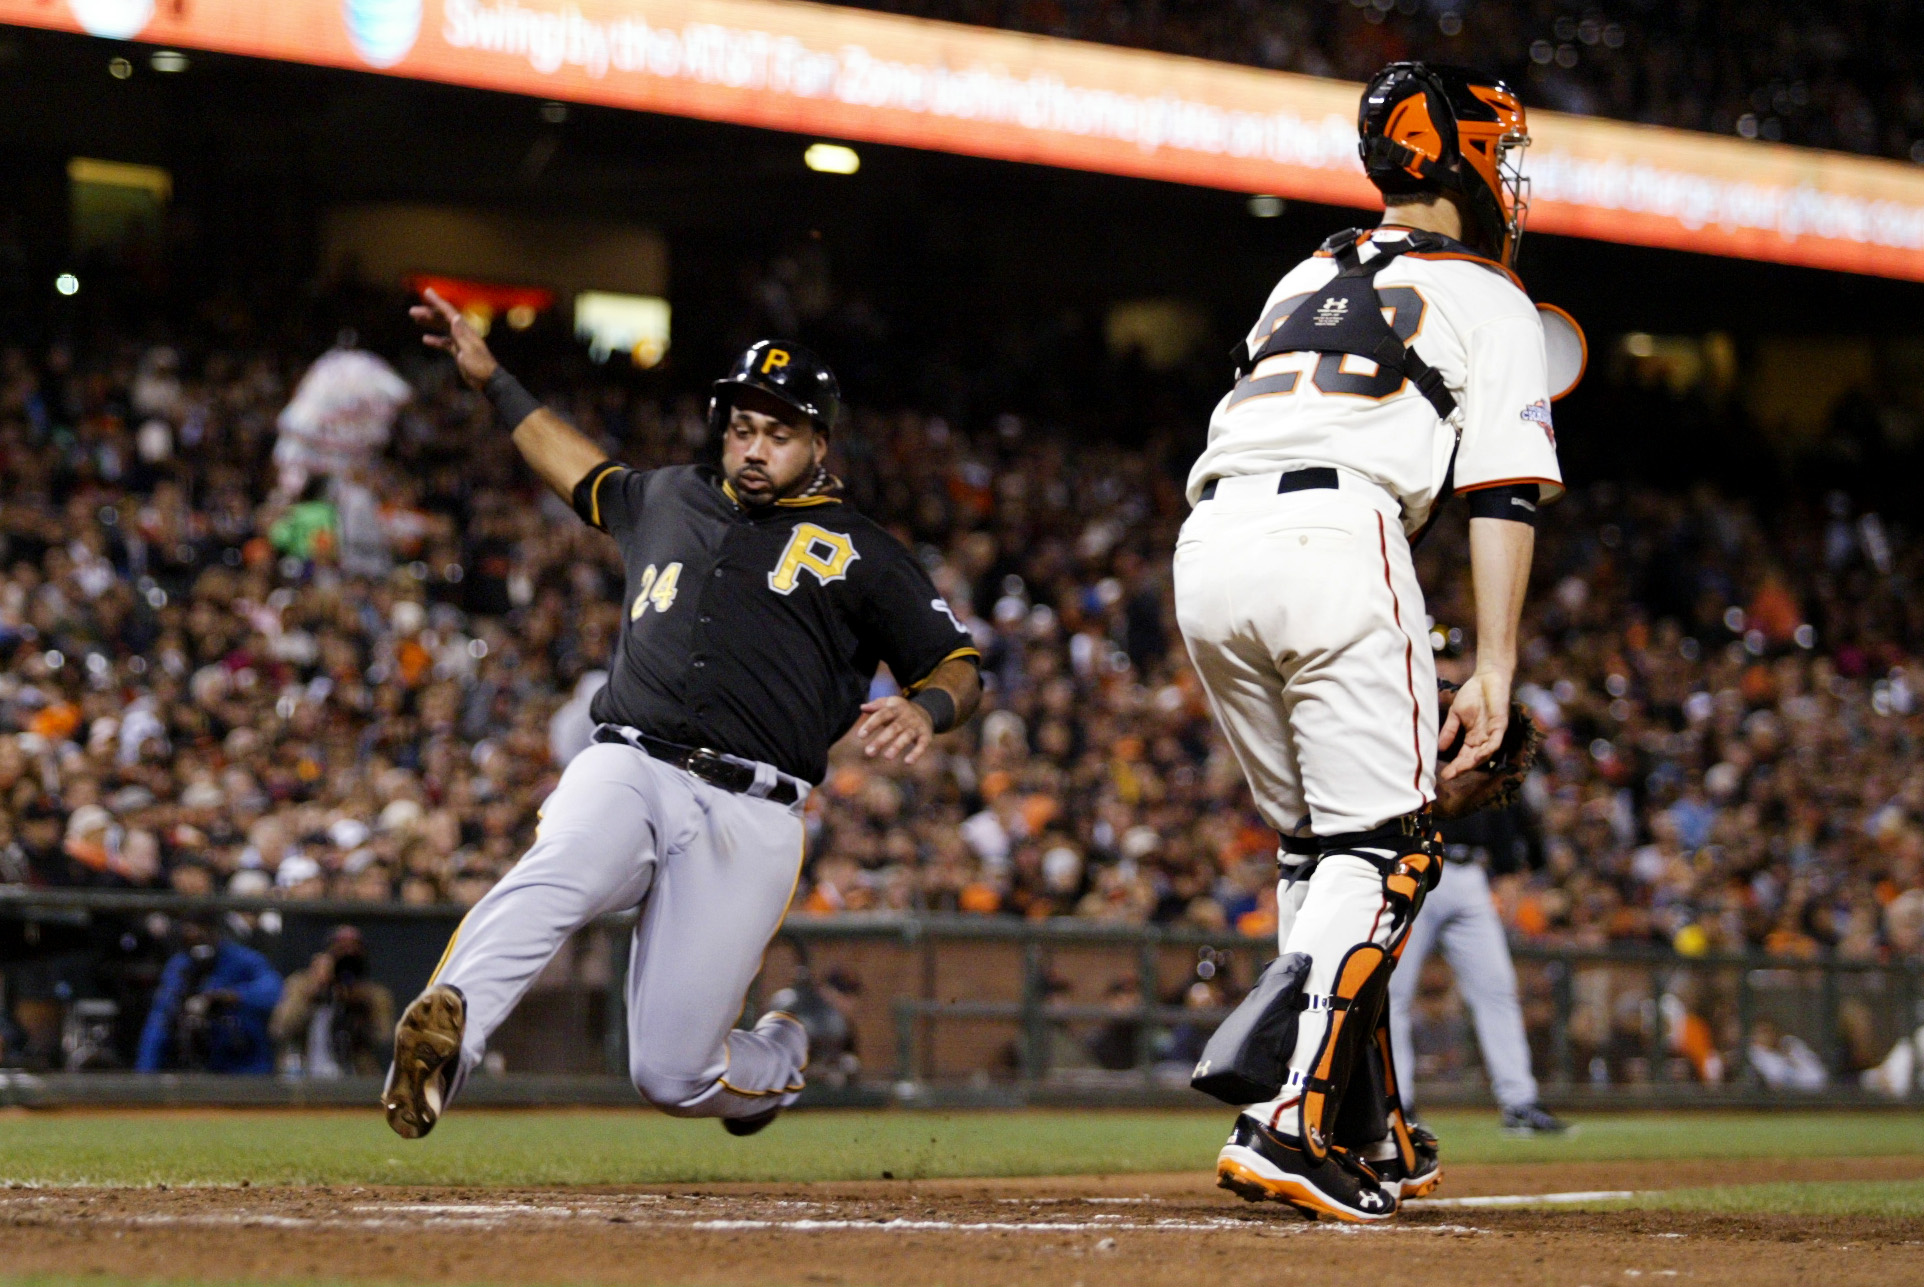 Pittsburgh Pirates’ Pedro Alvarez (24) scores on a sacrifice fly by Gaby Sanchez (14) as San Francisco Giants catcher Buster Posey (28) looks on in the fifth inning of a MLB game at AT&amp;T Park in San Francisco, Calif., on Thursday, Aug. 22, 2013. (Ray Chav